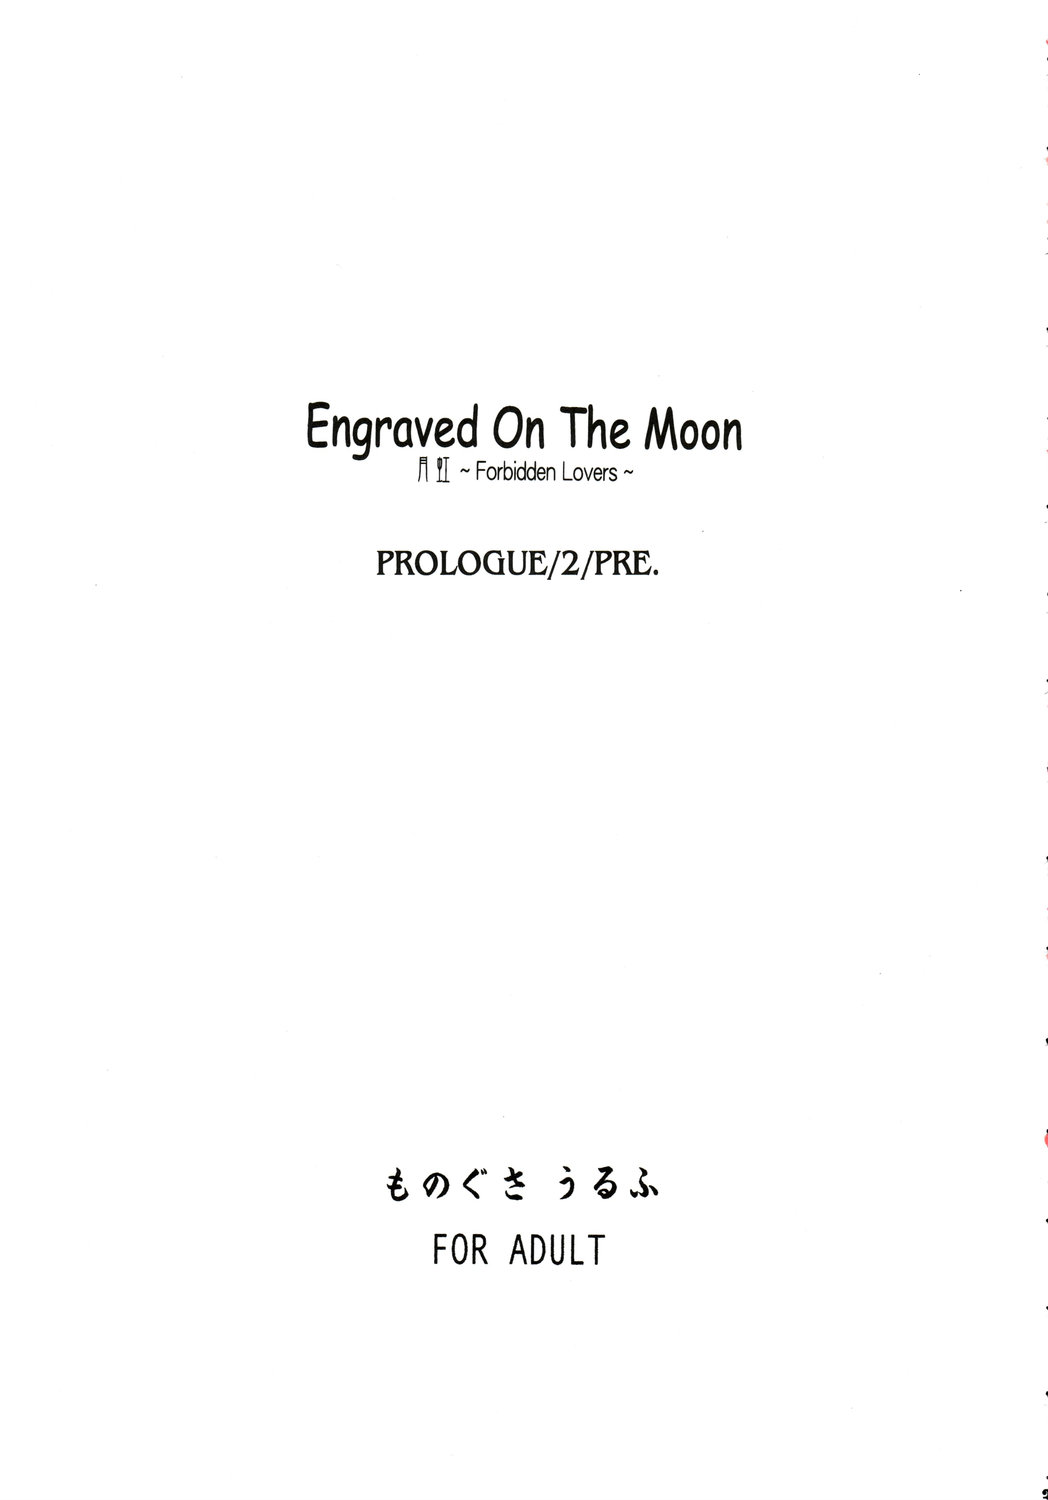 [Monogusa Wolf] Engraved On The Moon Prologue/2 page 3 full